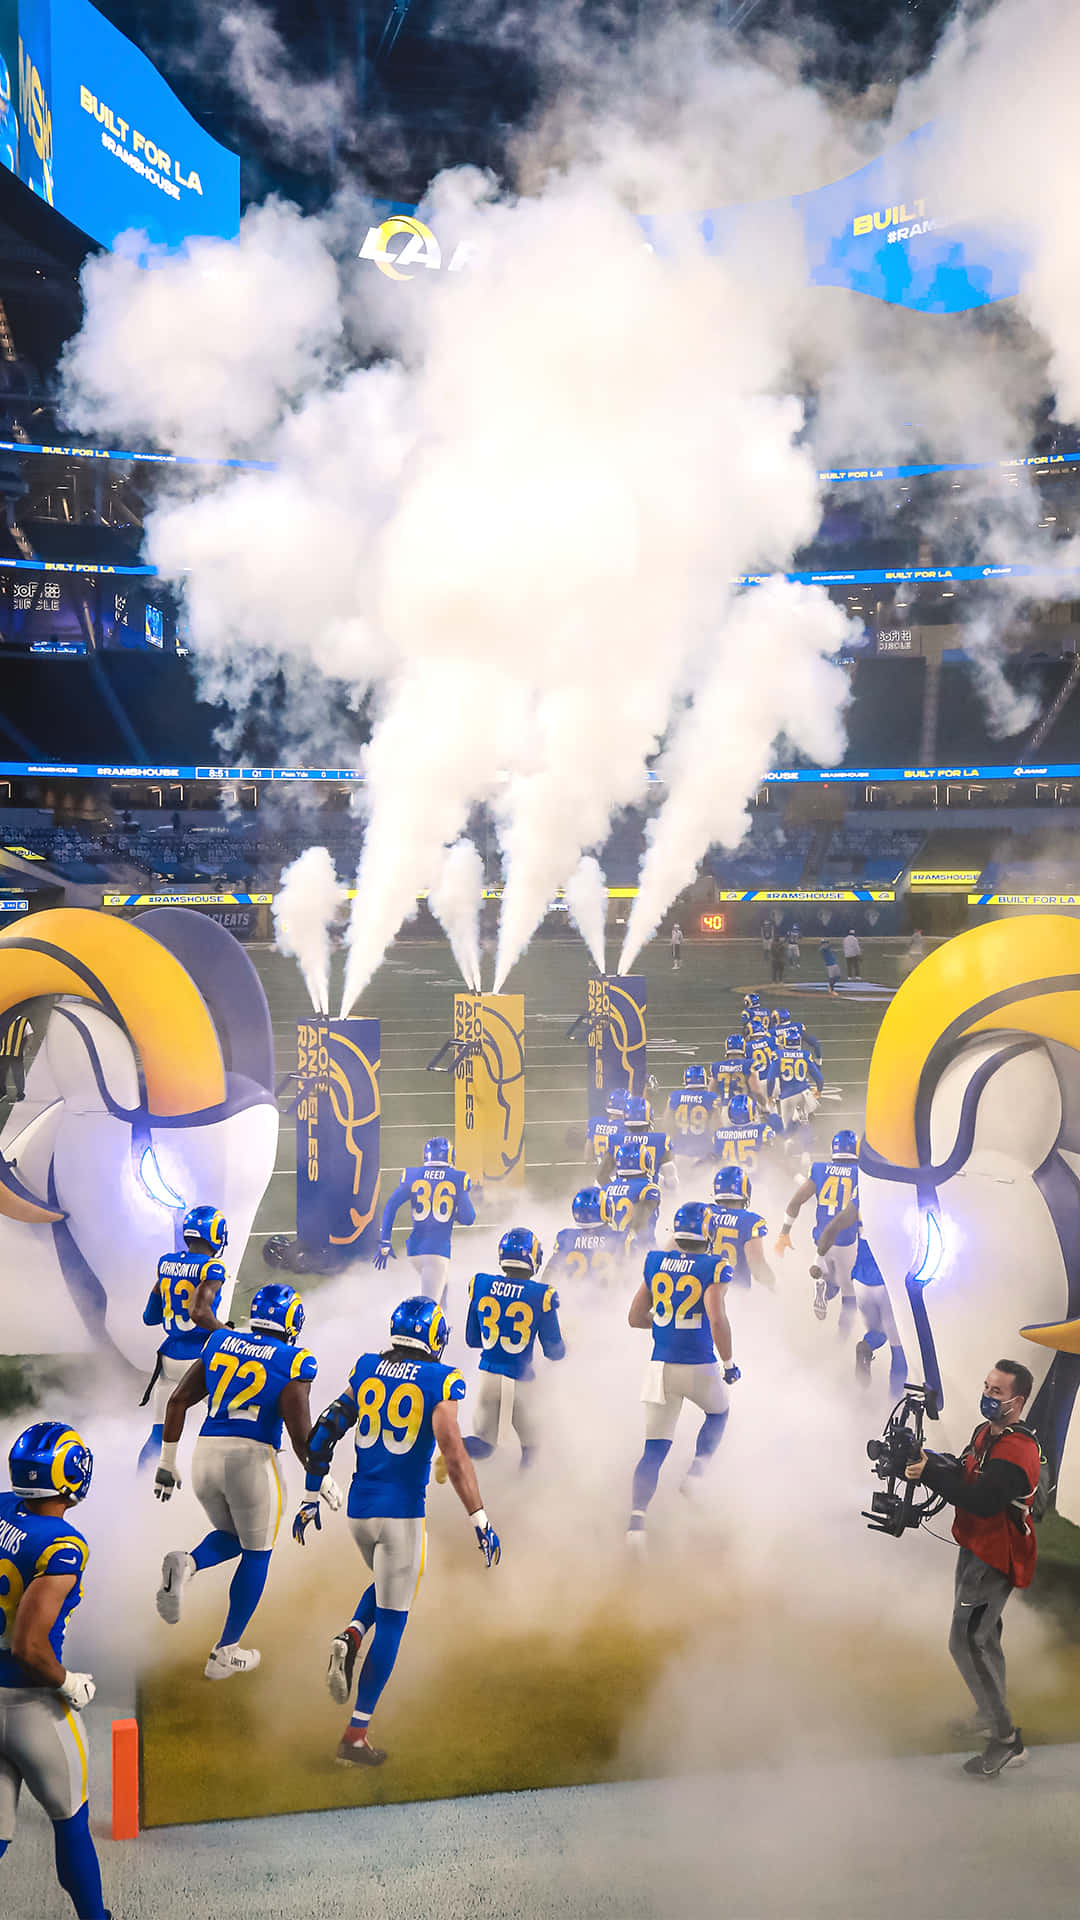 “Be Cool with the Cool Rams” Wallpaper